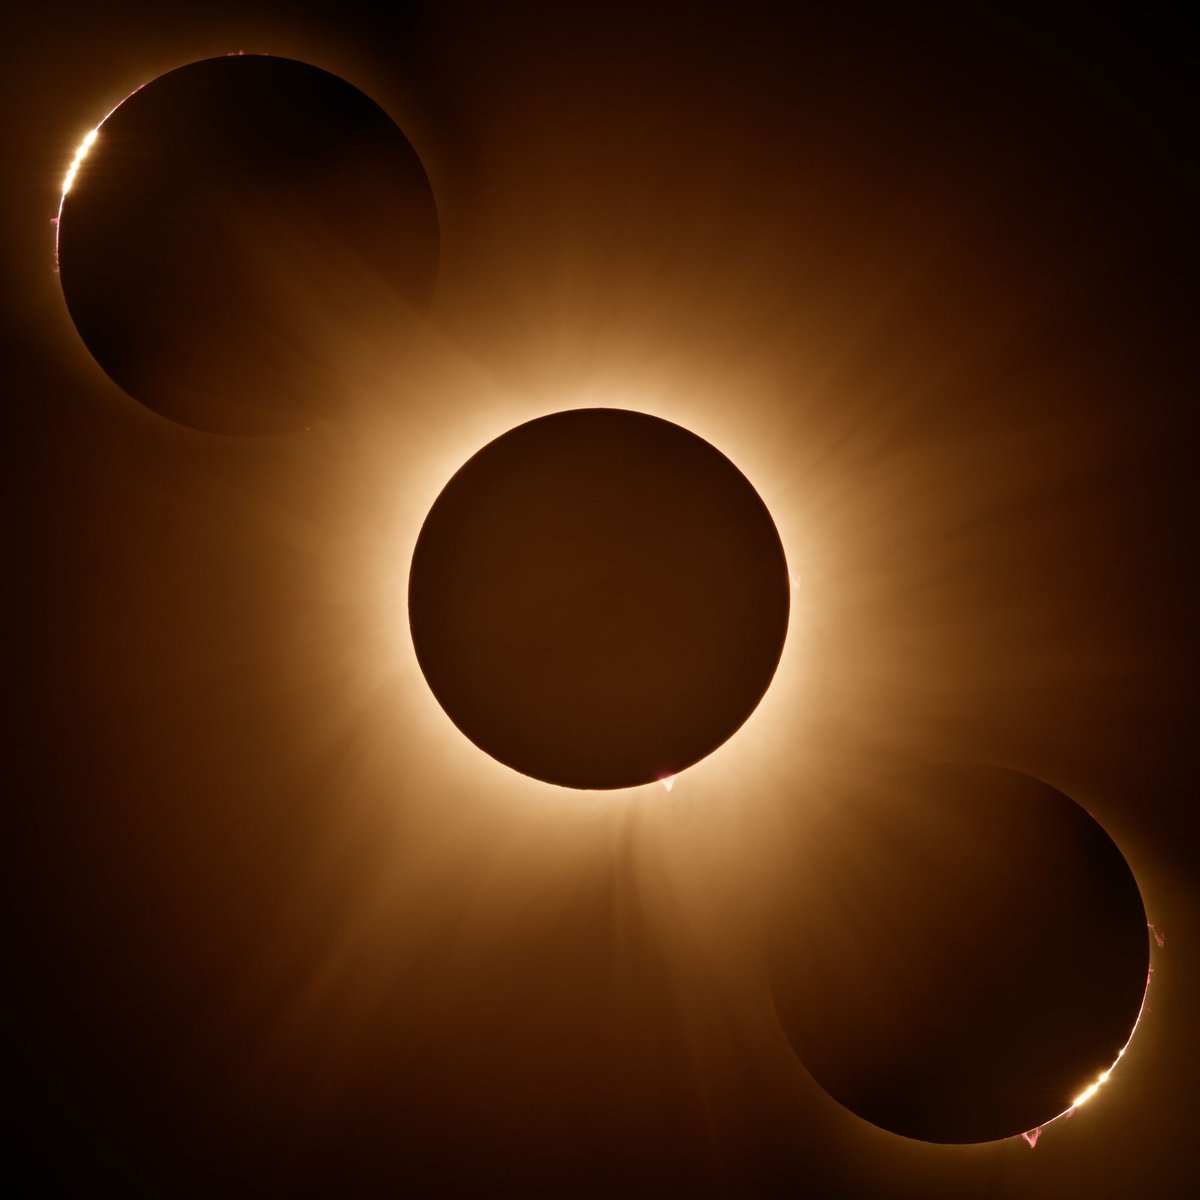 AstroBin's Image of the Day: 'Baily's Beads on Either Side of Totality - Solar Eclipse 4/8/24' by Brennan Gilmore

astrobin.com/14oin5/?utm_so…

#astrophotography #astronomy #astrobin #imageoftheday